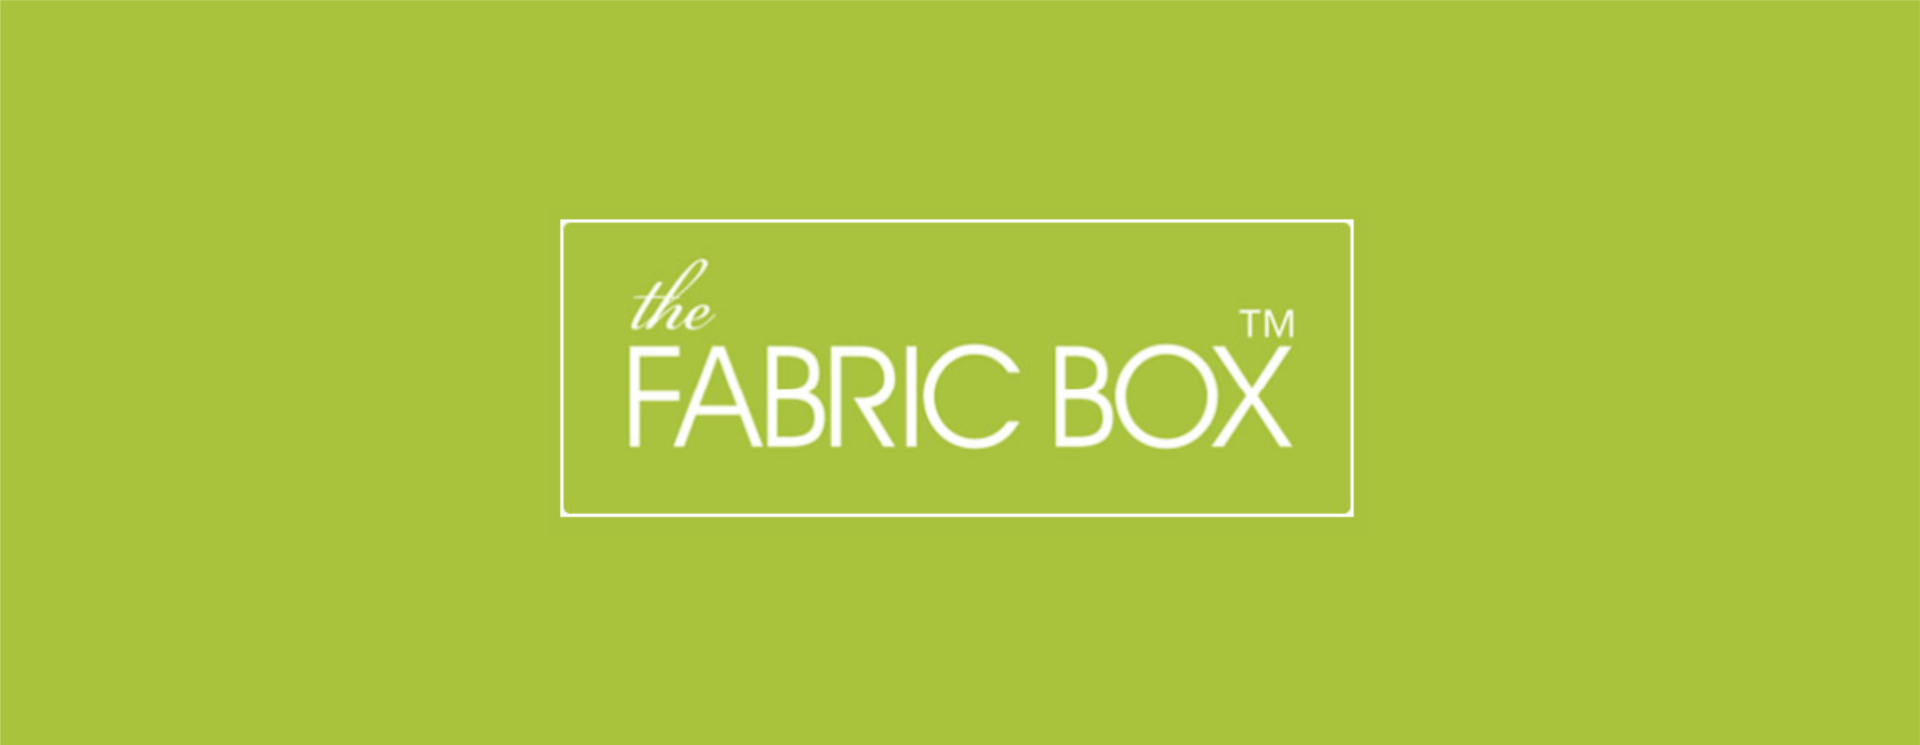 The Fabric Box Roller Blinds. Roller blinds from the Fabric Box roller blinds collection. Roller blinds a balance of harmonious tones, eclectic palettes, distinctive design & sophisticated textures.